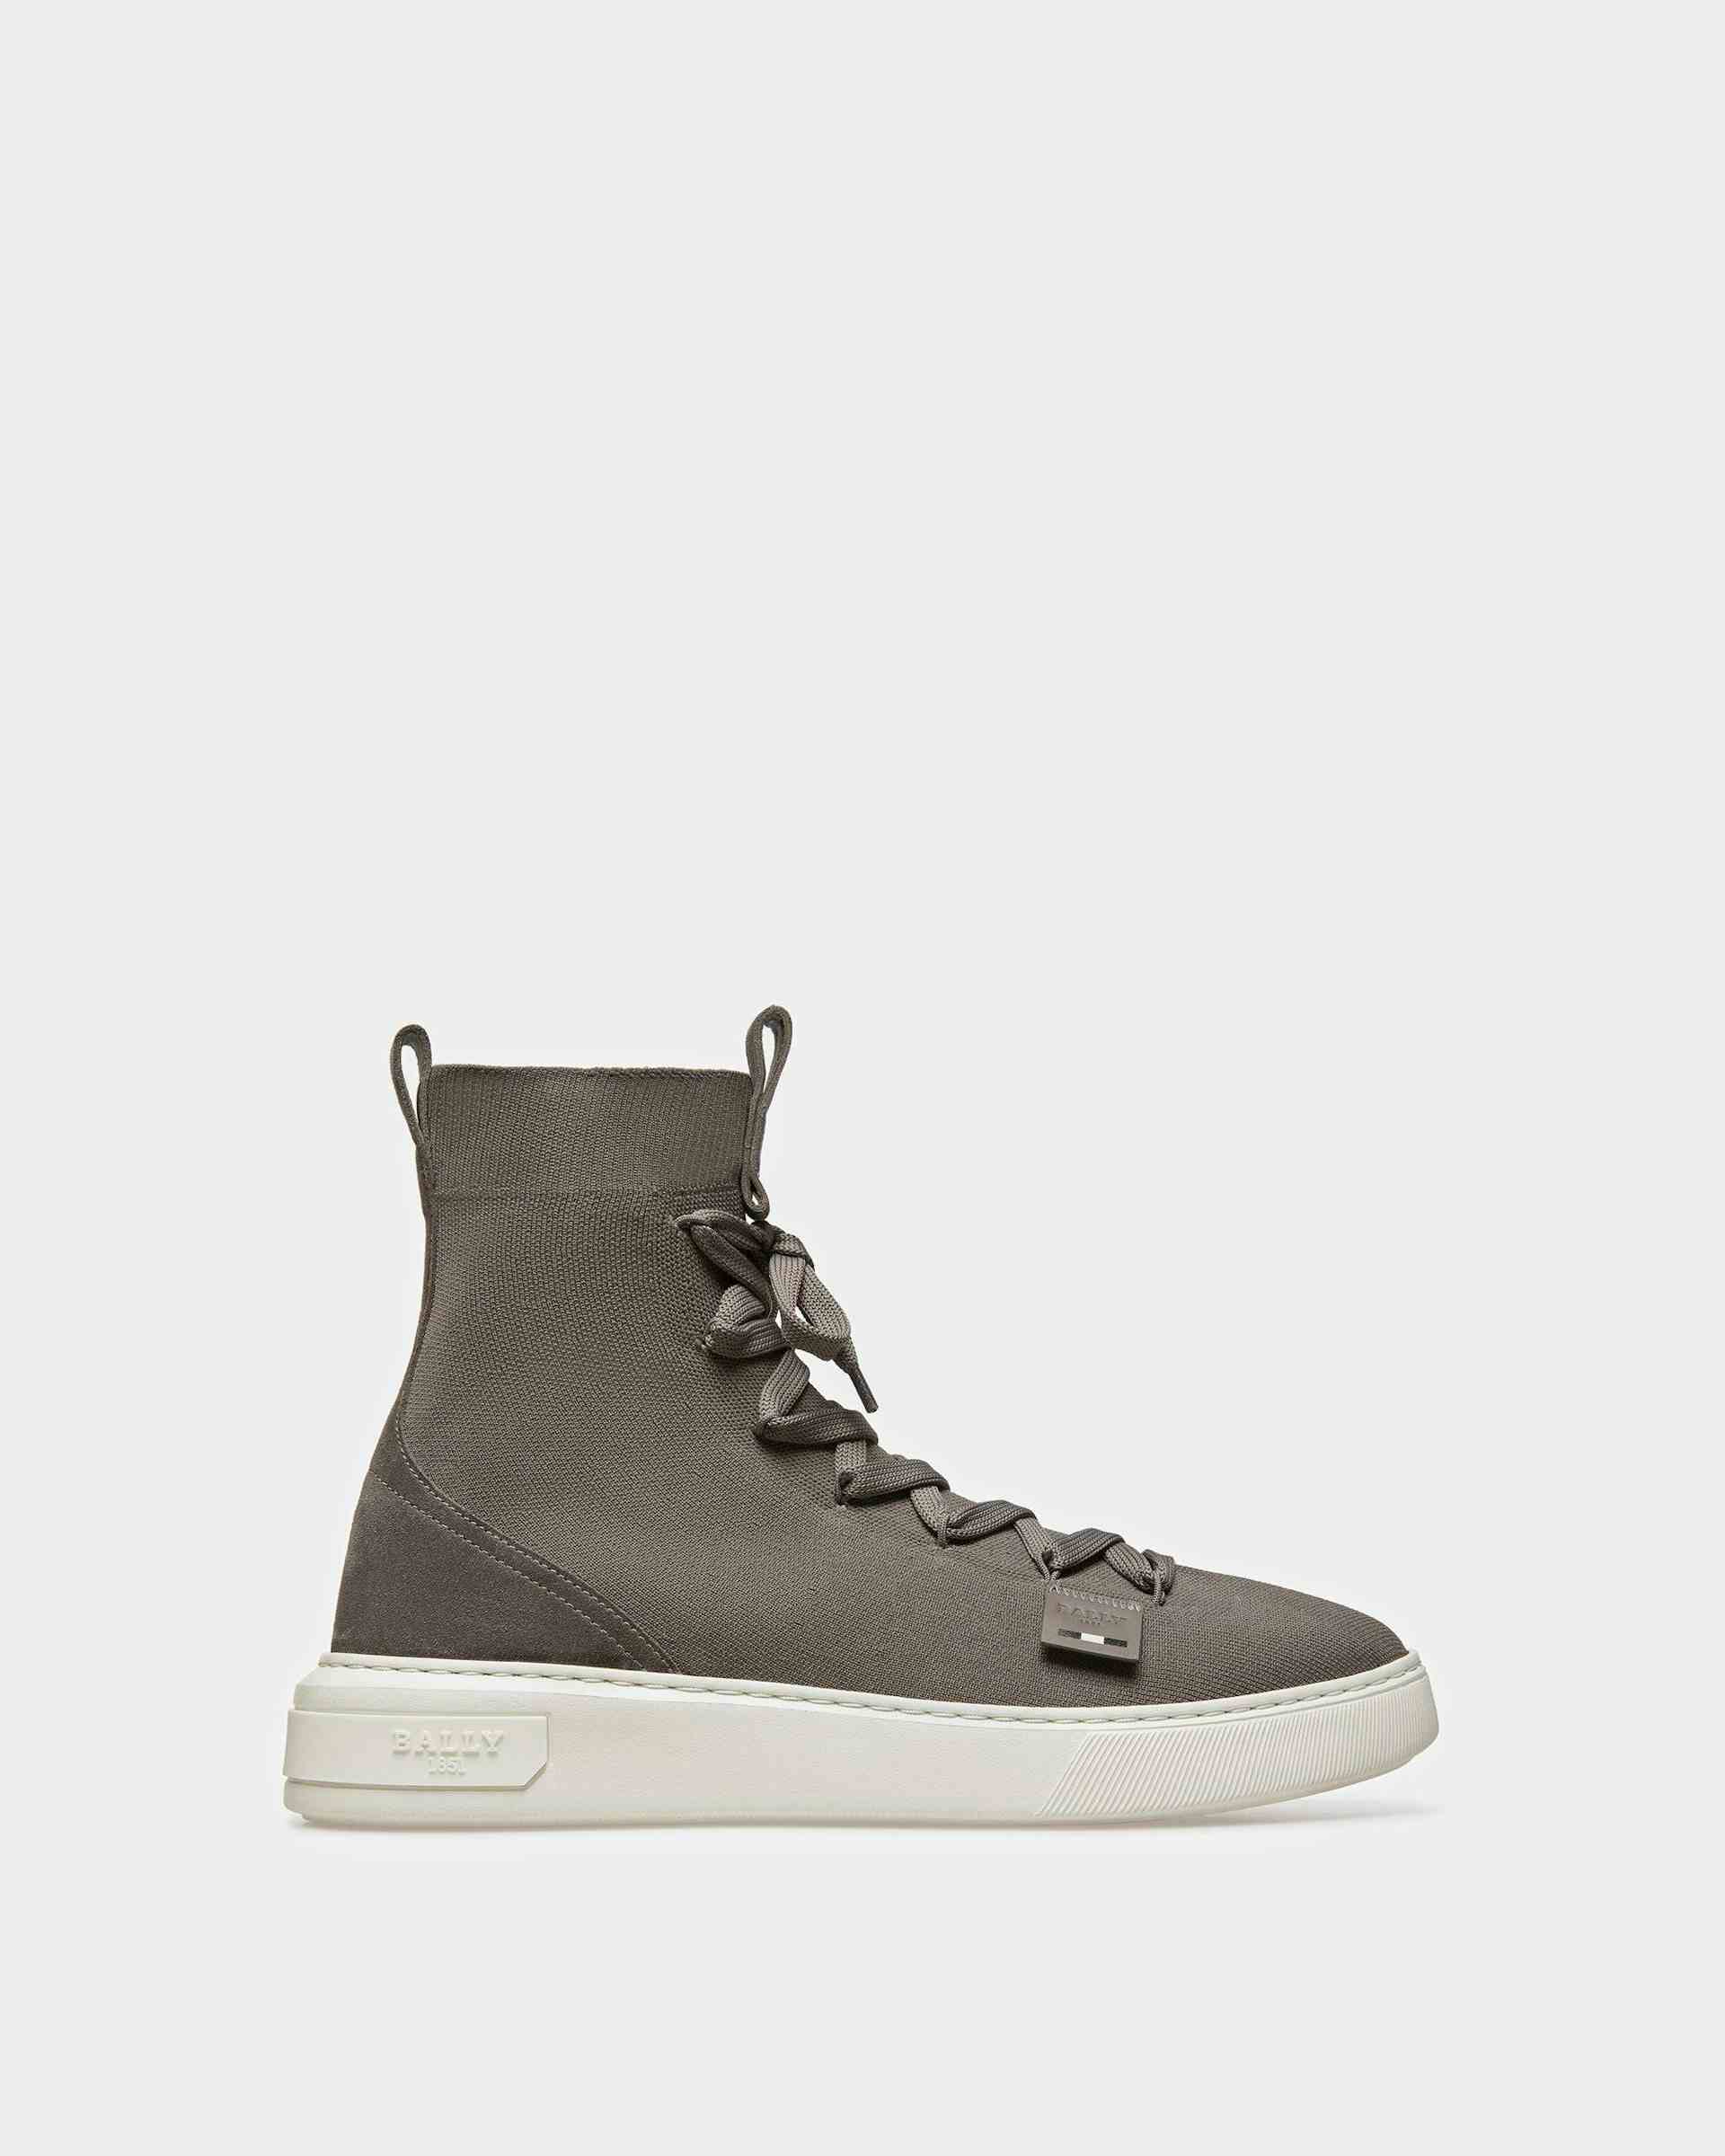 Mitys-T Leather Sneakers In Dark Mineral - Men's - Bally